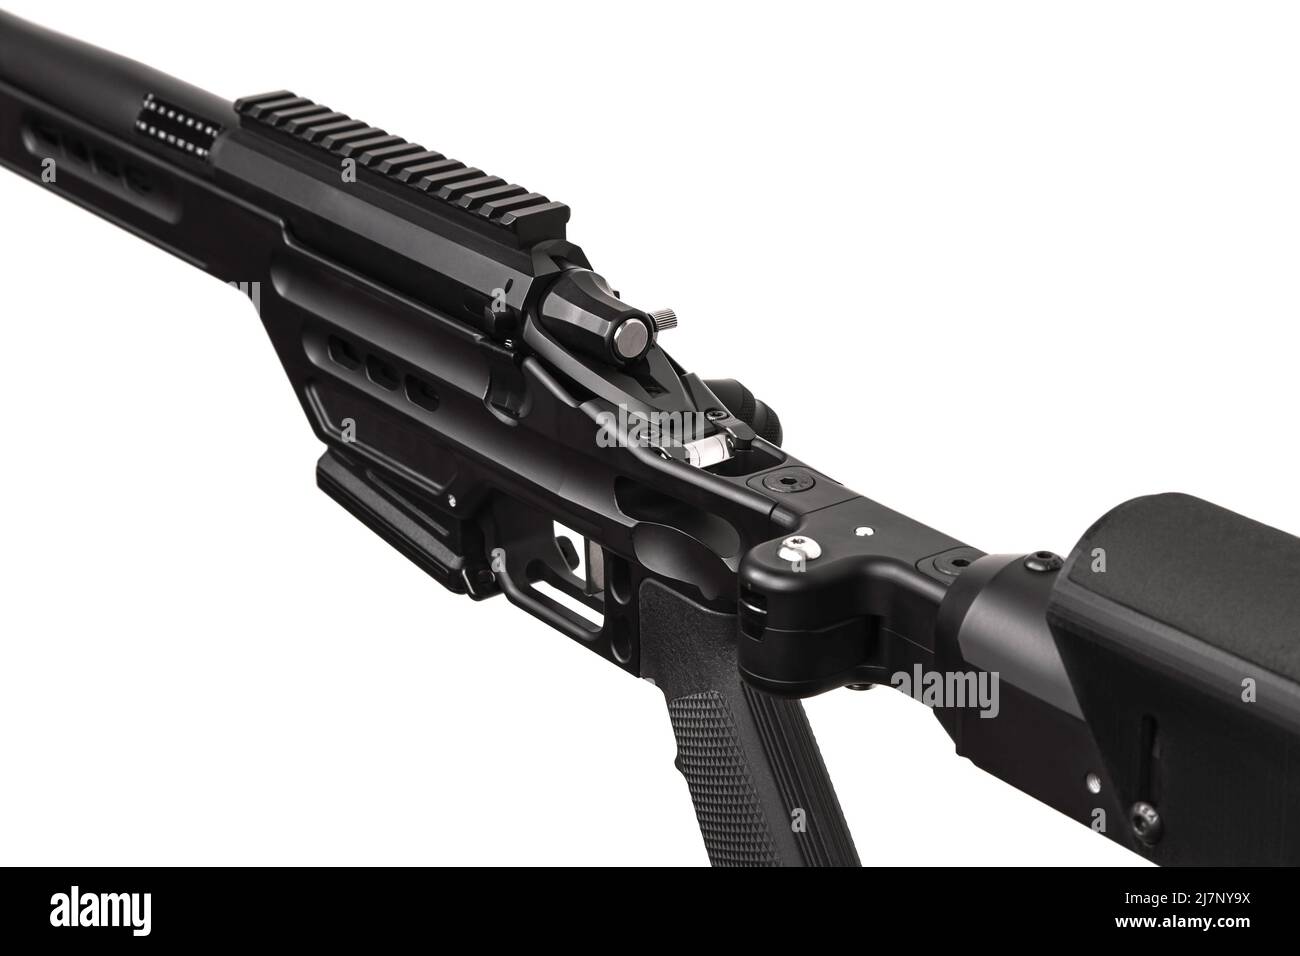 Modern powerful sniper rifle. Weapons for long-range shooting. Isolate on a white background. Stock Photo